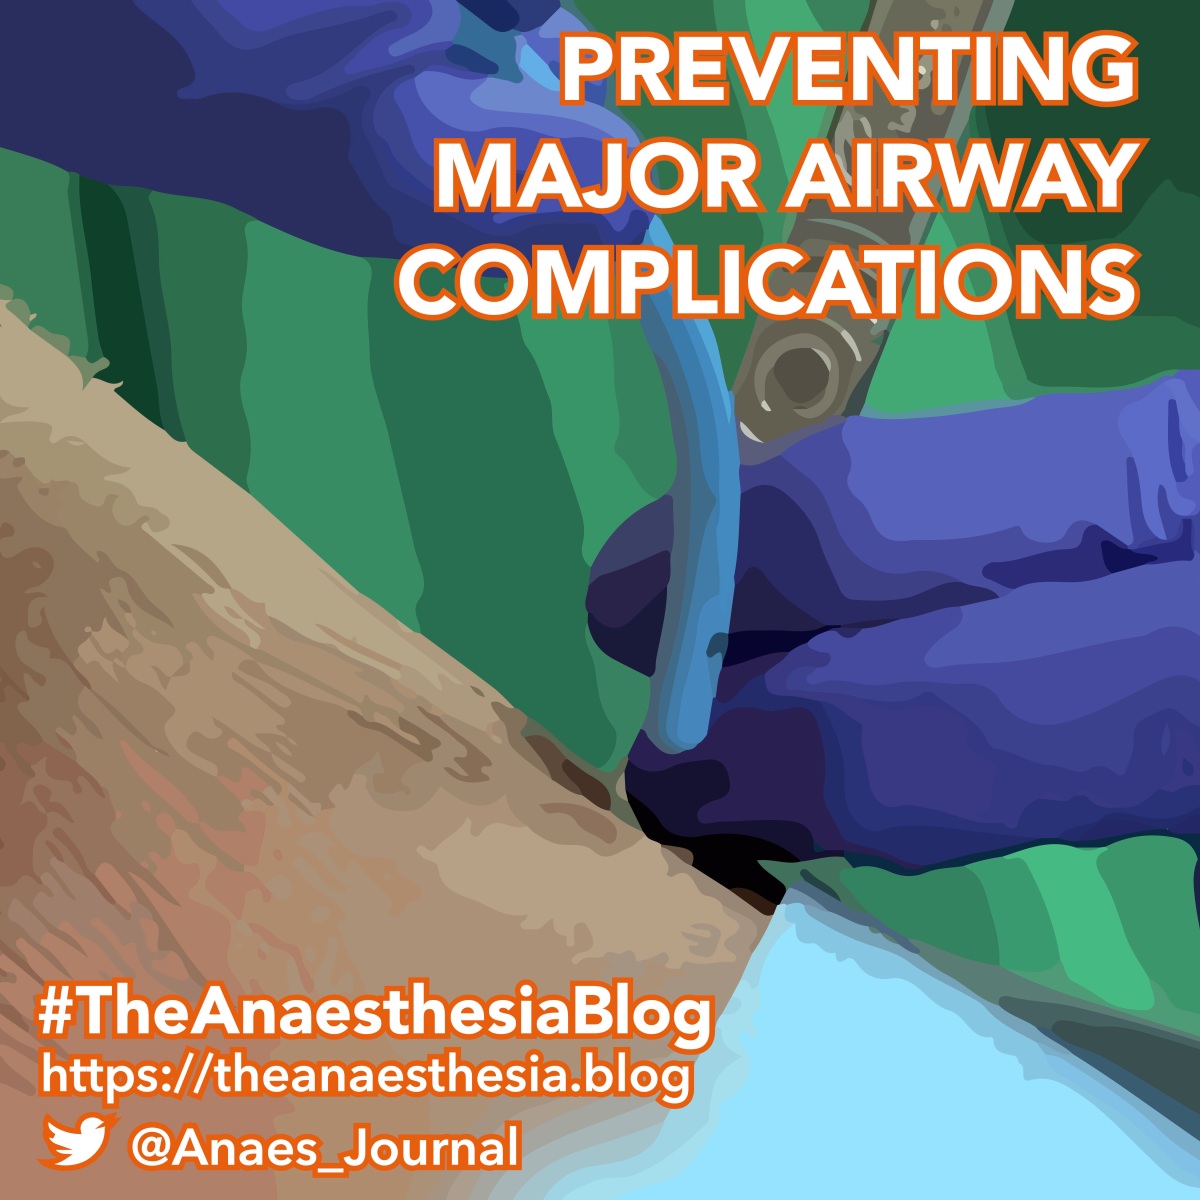 Preventing major airway complications